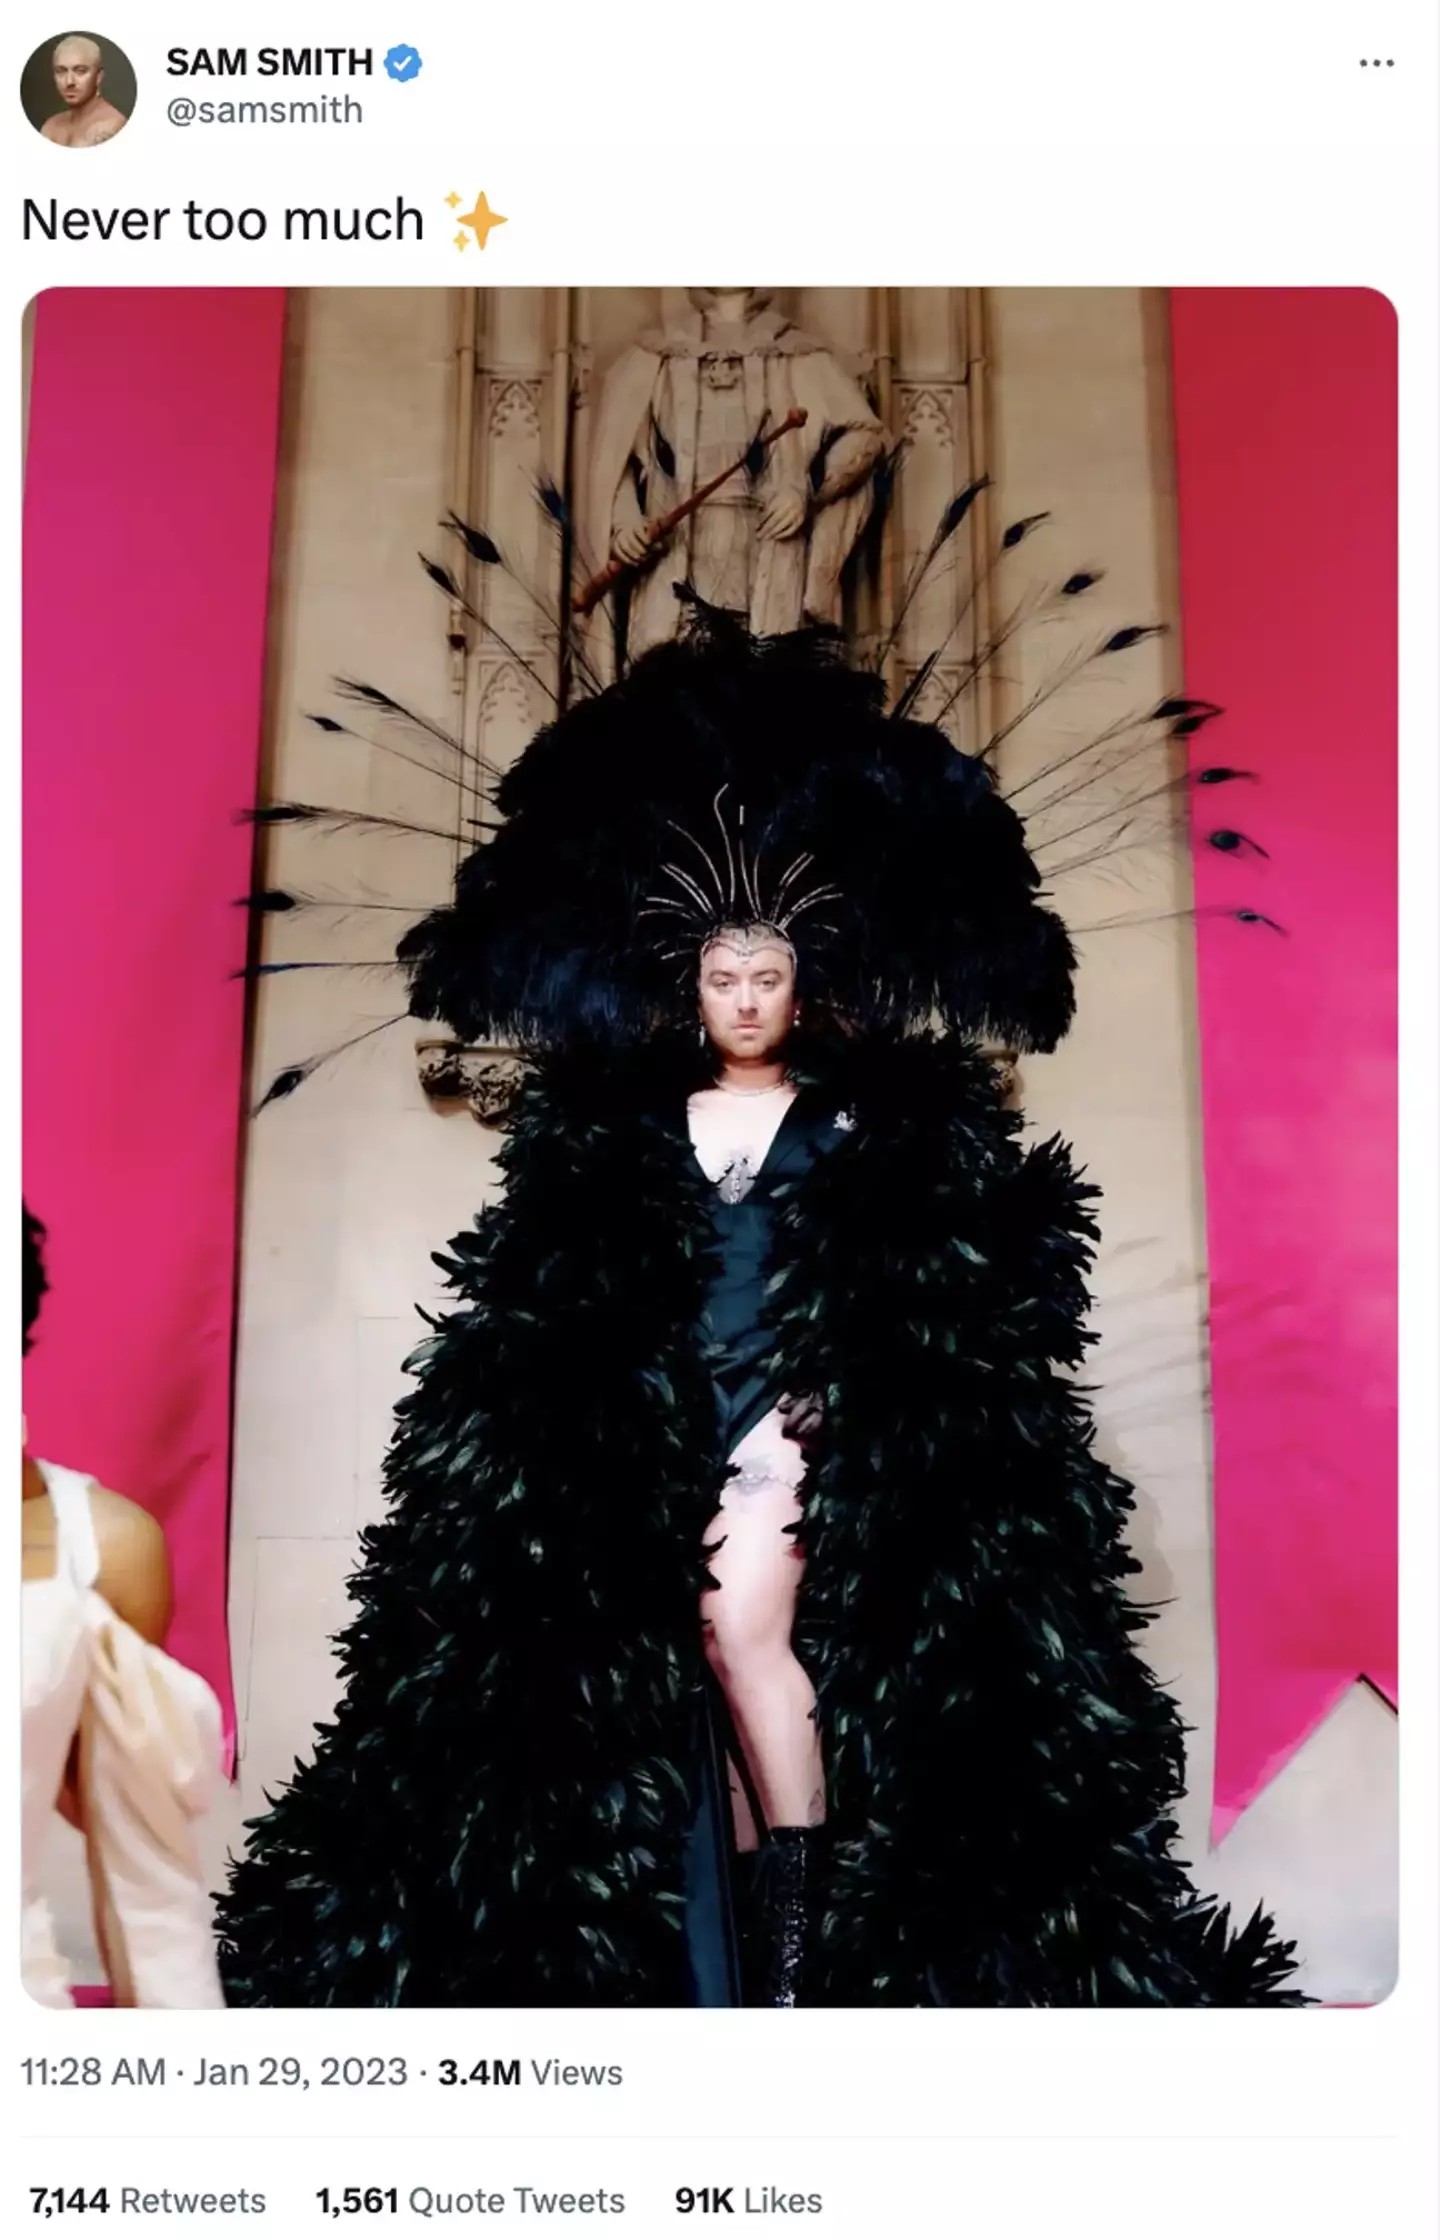 Sam Smith has laughed off recent criticism, with a cheeky tweet showing the singer in a stunning feather outfit.